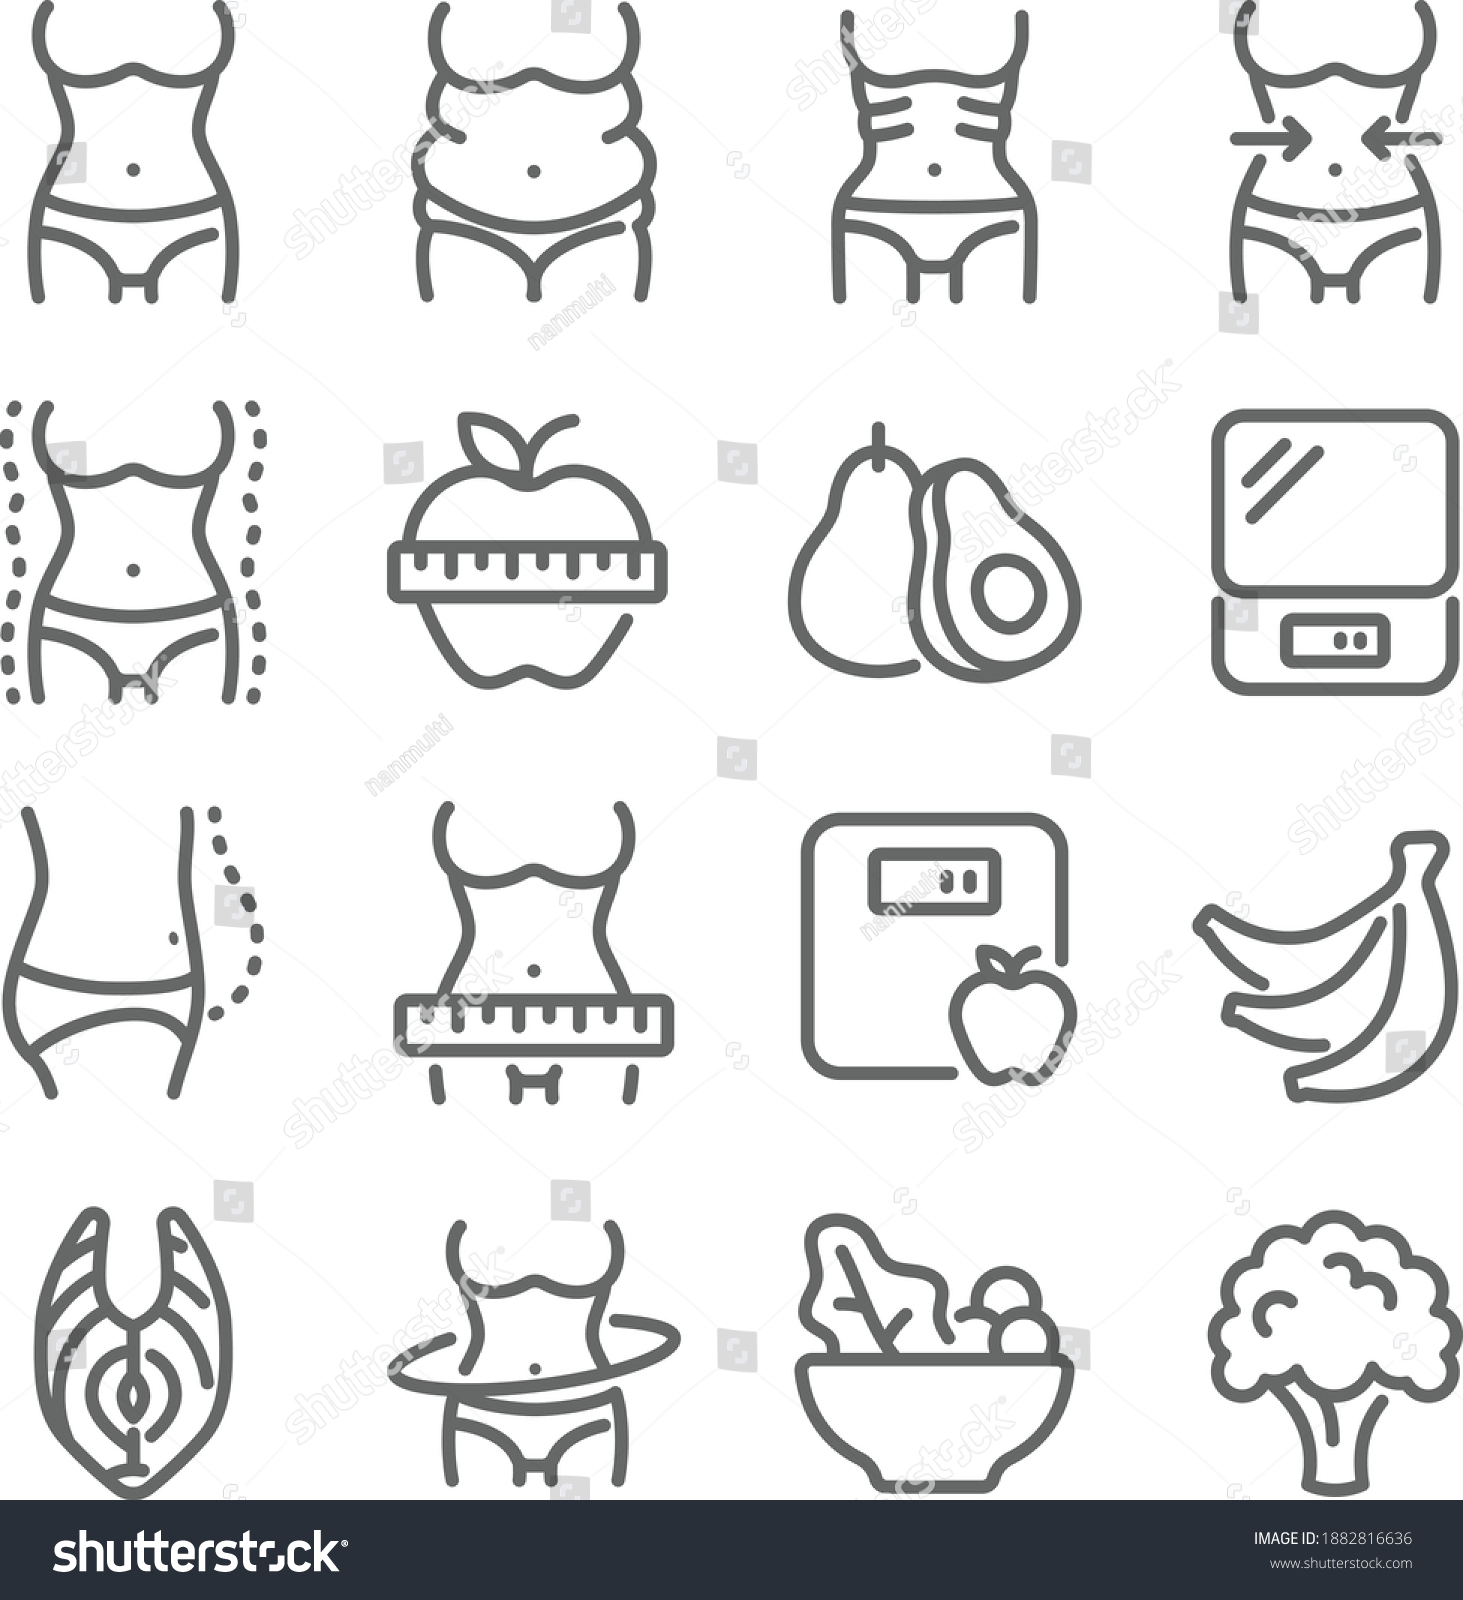 SVG of Diet icon illustration vector set. Contains such icons as Body, Diet, Skinny, Fat, Weight loss, Overweight, Fitness, and more. Expanded Stroke svg